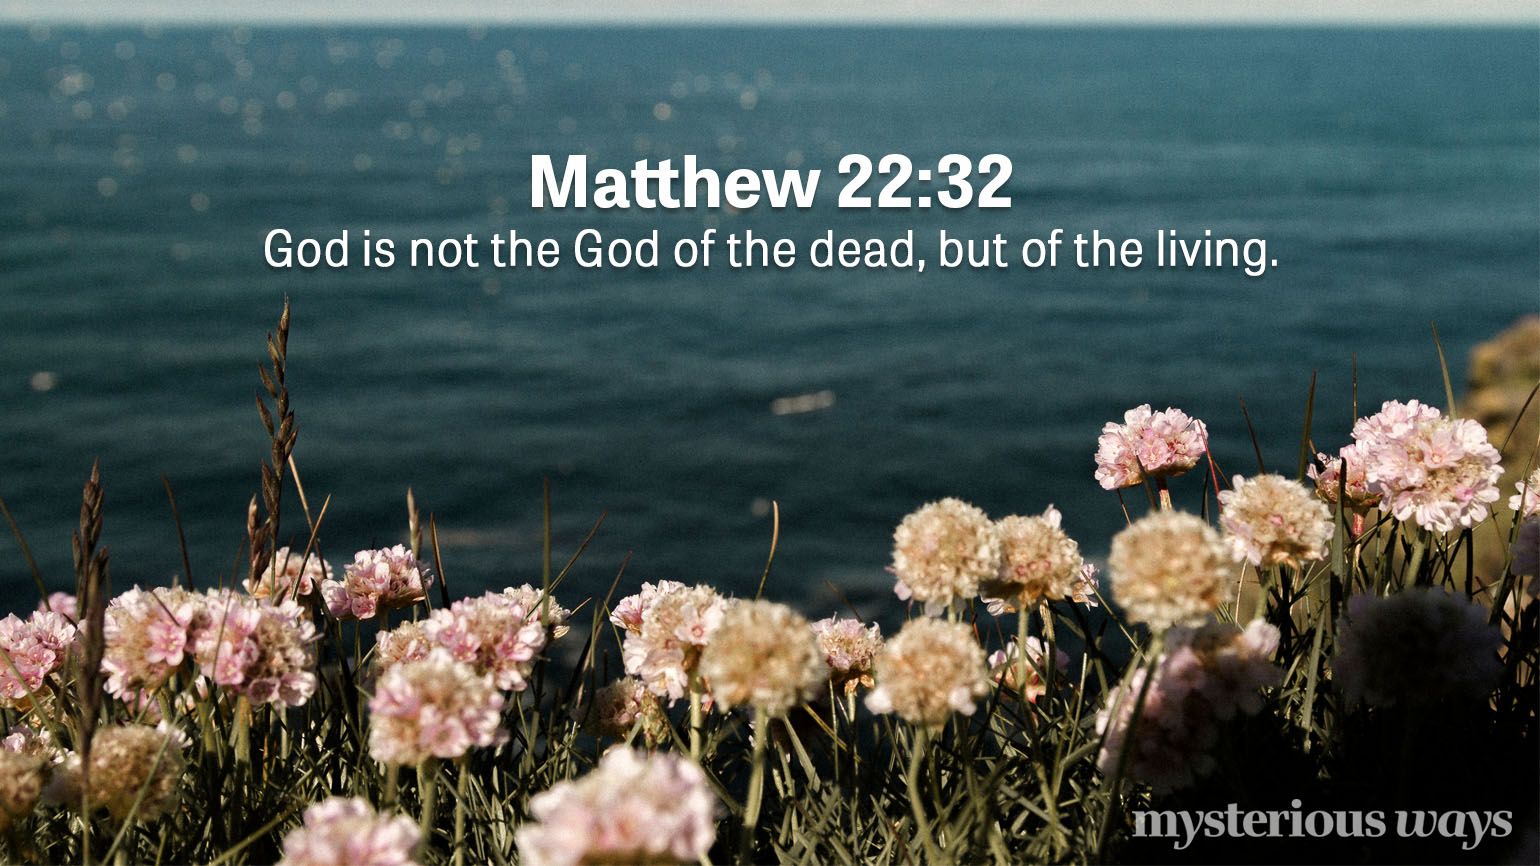 Matthew 22:32 “God is not the God of the dead, but of the living.”